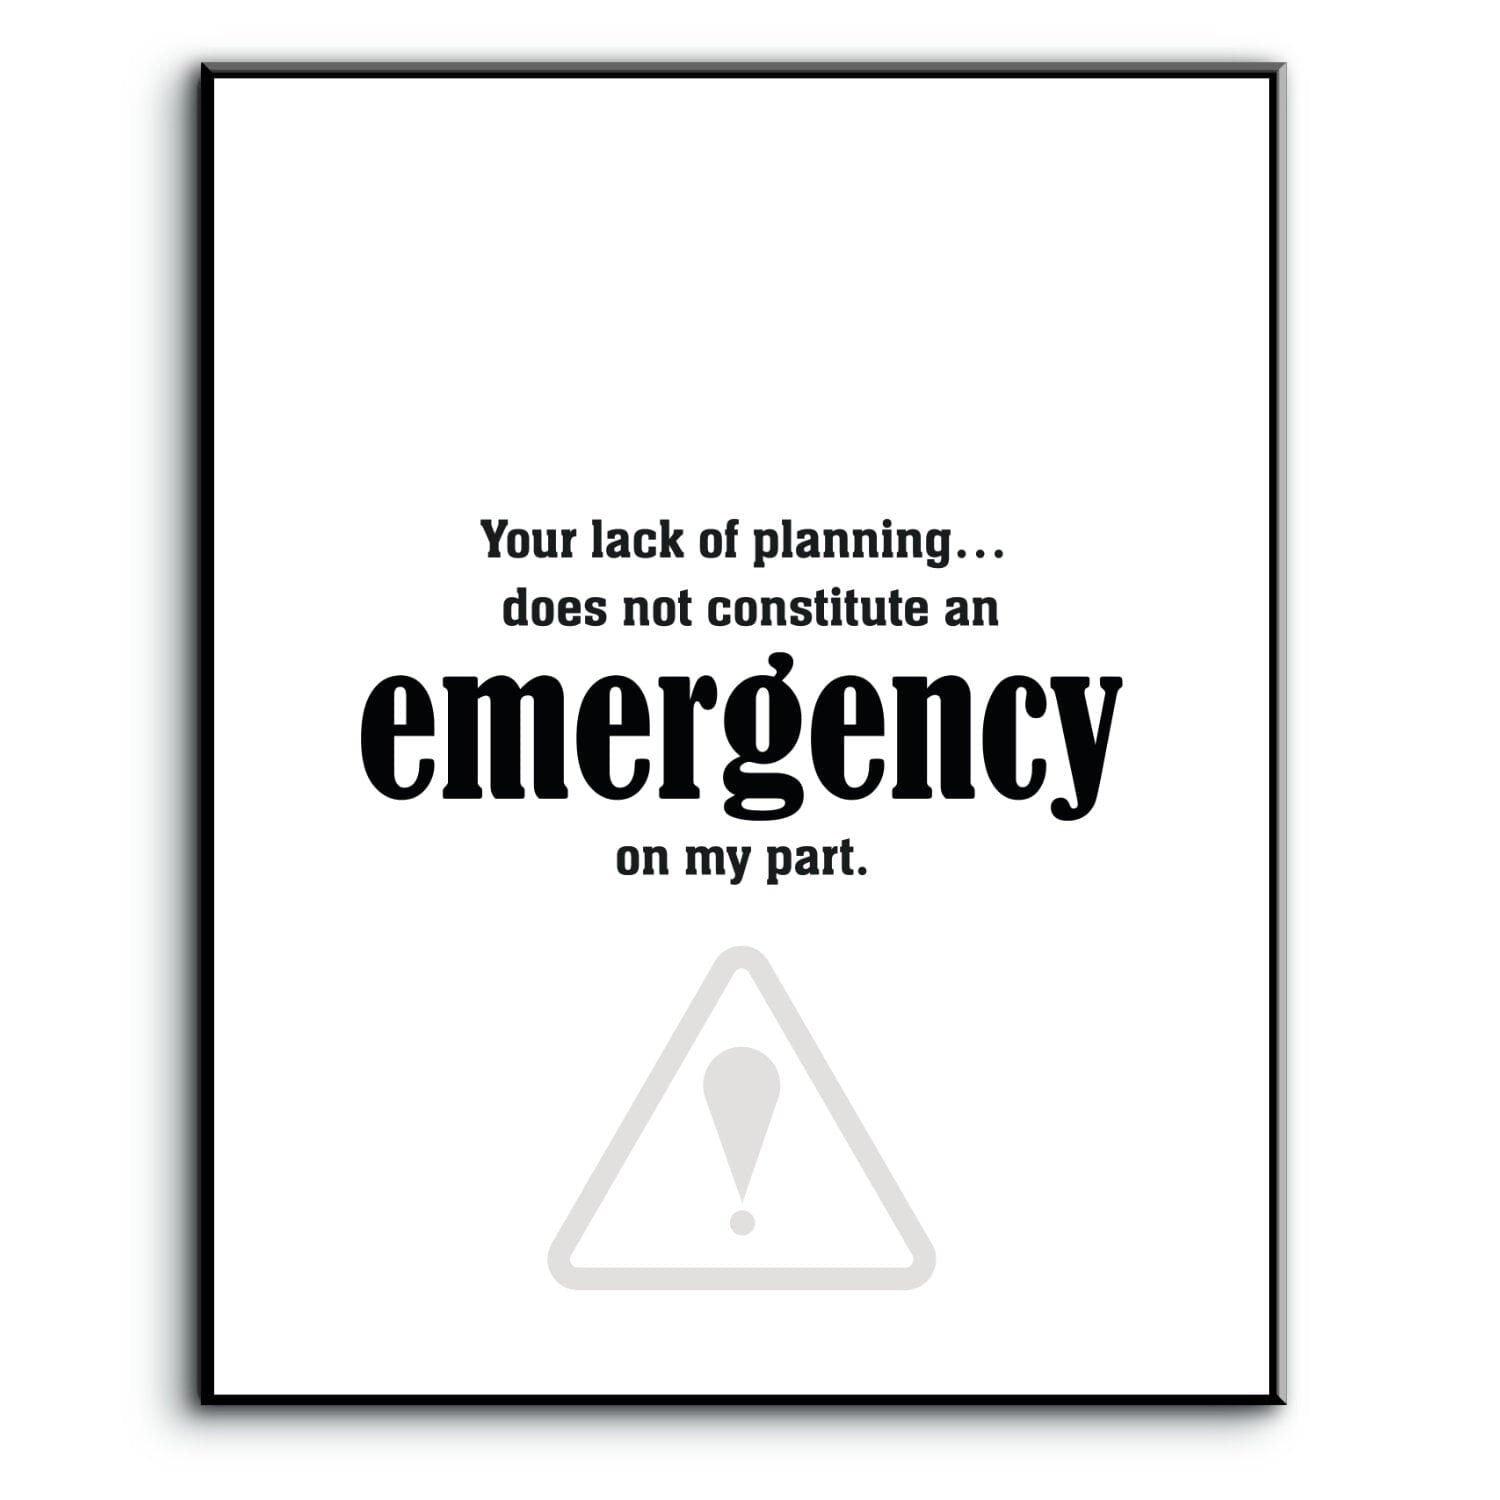 Your Lack of Planning Does Not Constitute an Emergency Wise and Wiseass Quotes Song Lyrics Art 8x10 Plaque Mount 